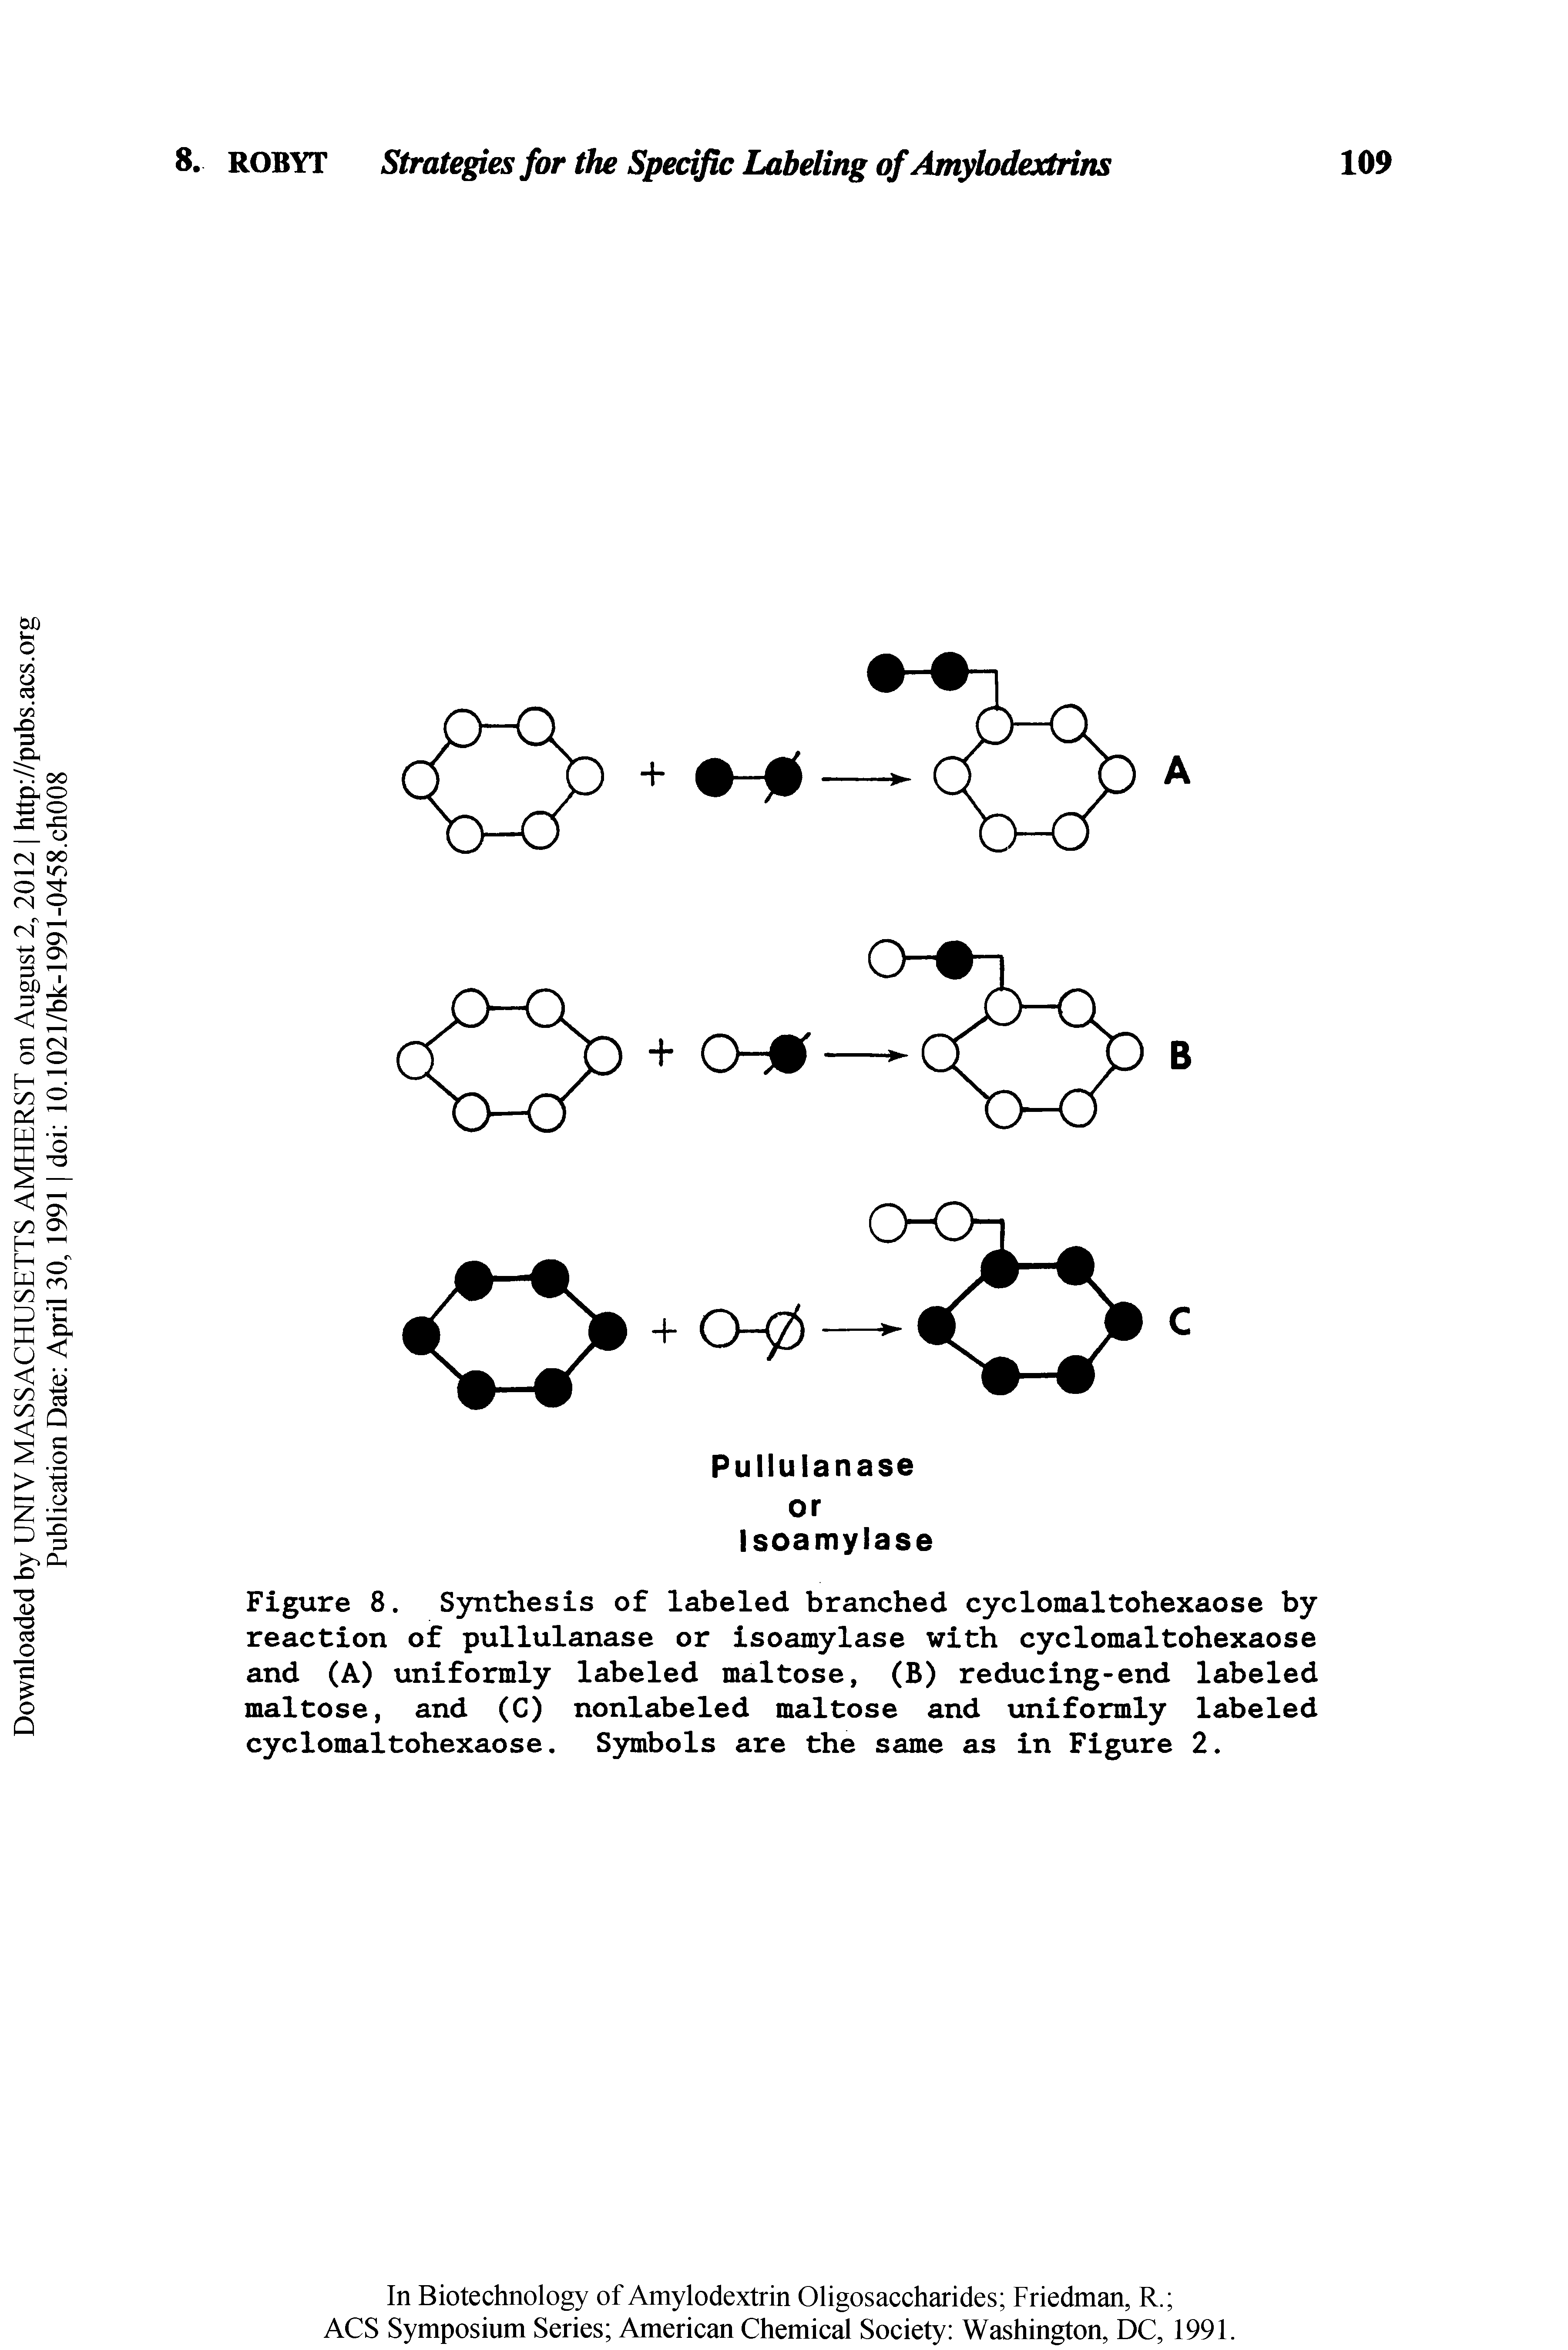 Figure 8. Synthesis of labeled branched cyclomaltohexaose by reaction of pullulanase or isoamylase with cyclomaltohexaose and (A) miformly labeled maltose, (B) reducing-end labeled maltose, and (C) nonlabeled maltose and uniformly labeled cyclomaltohexaose. Symbols are the same as in Figure 2.